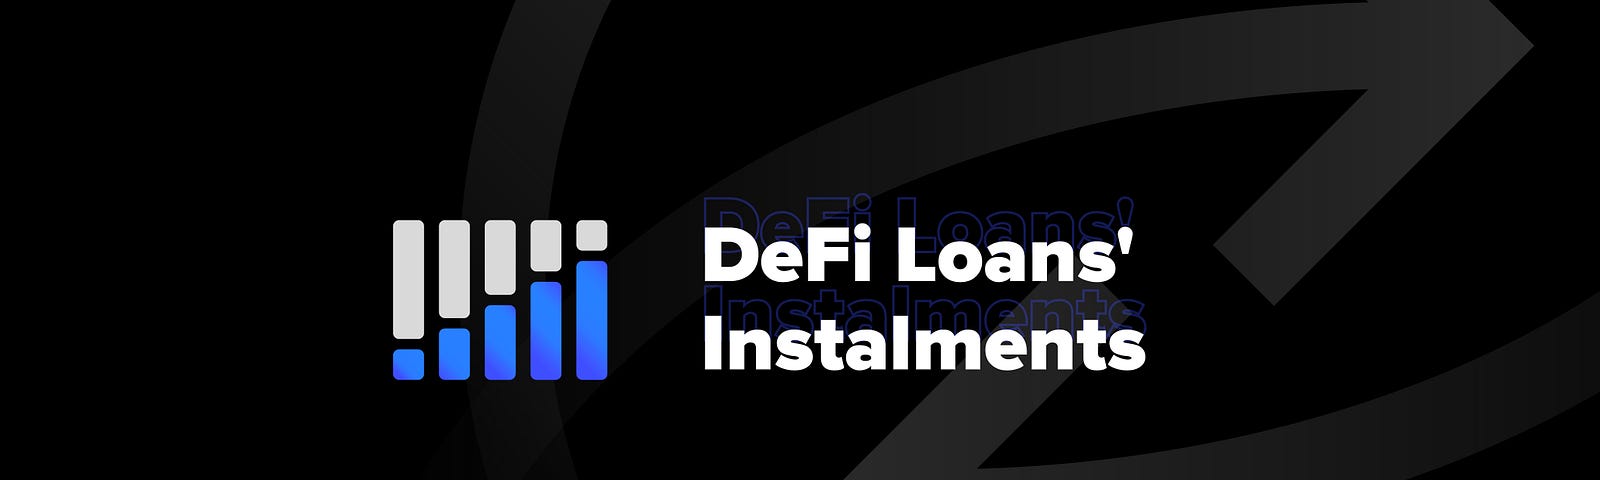 Instalments are now available for the Credit Marketplace’s DeFi Loans.